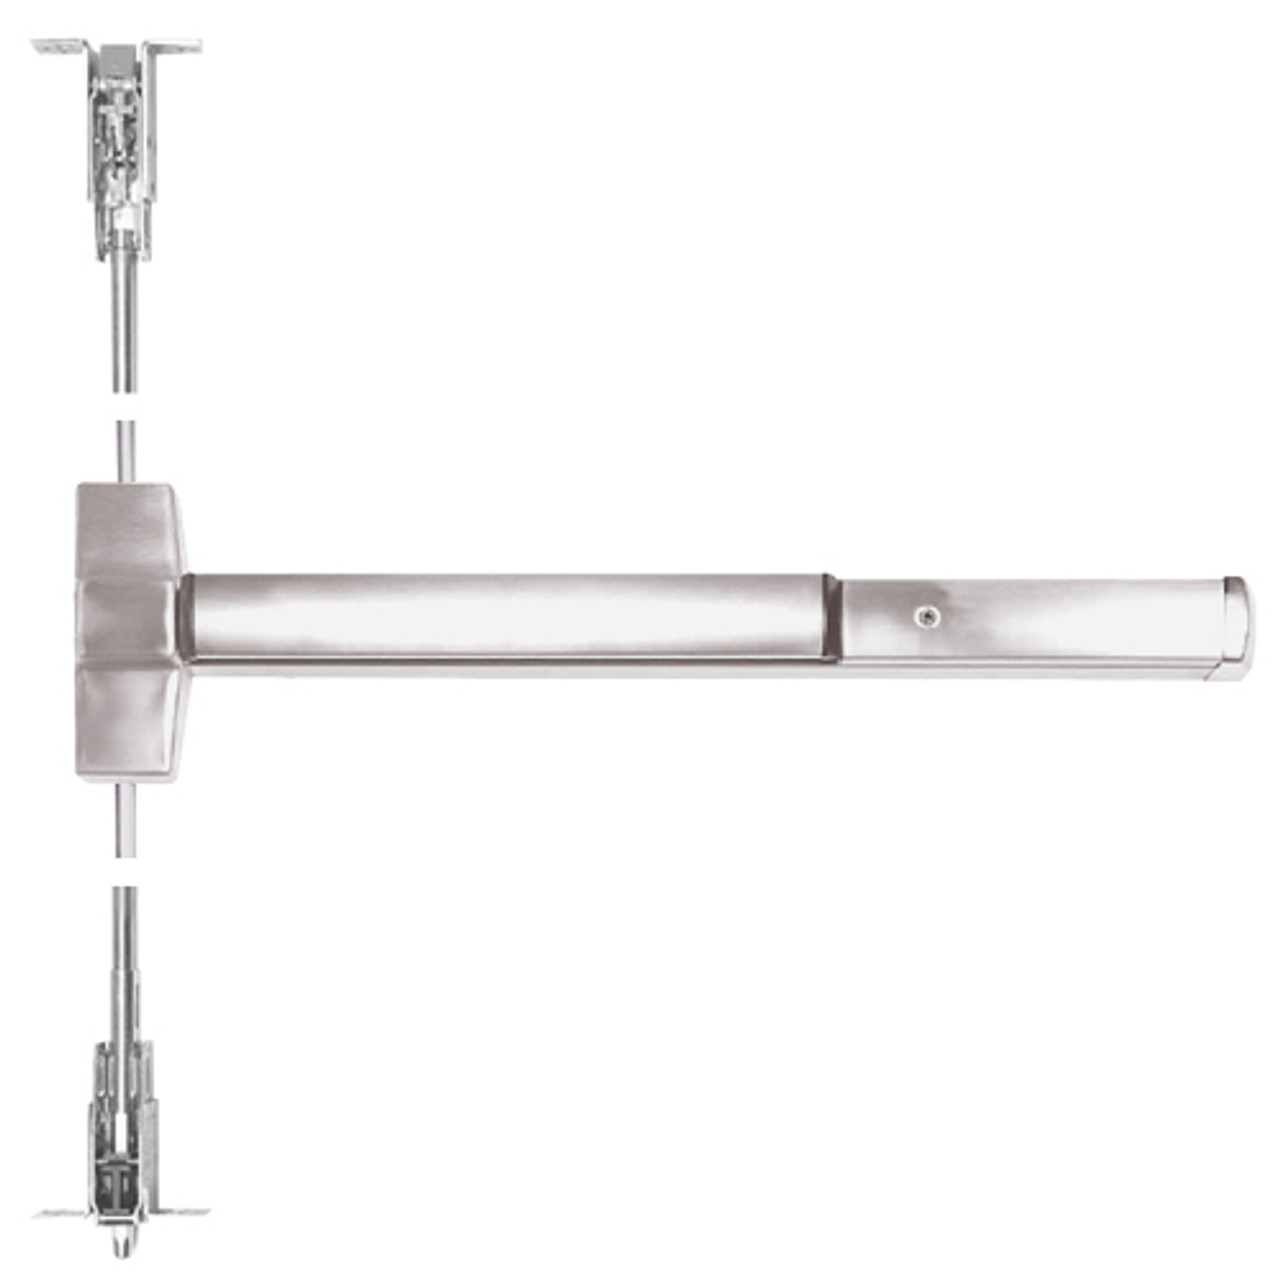 ED5860-630-W048 Corbin ED5800 Series Non Fire Rated Concealed Vertical Rod Device in Satin Stainless Steel Finish